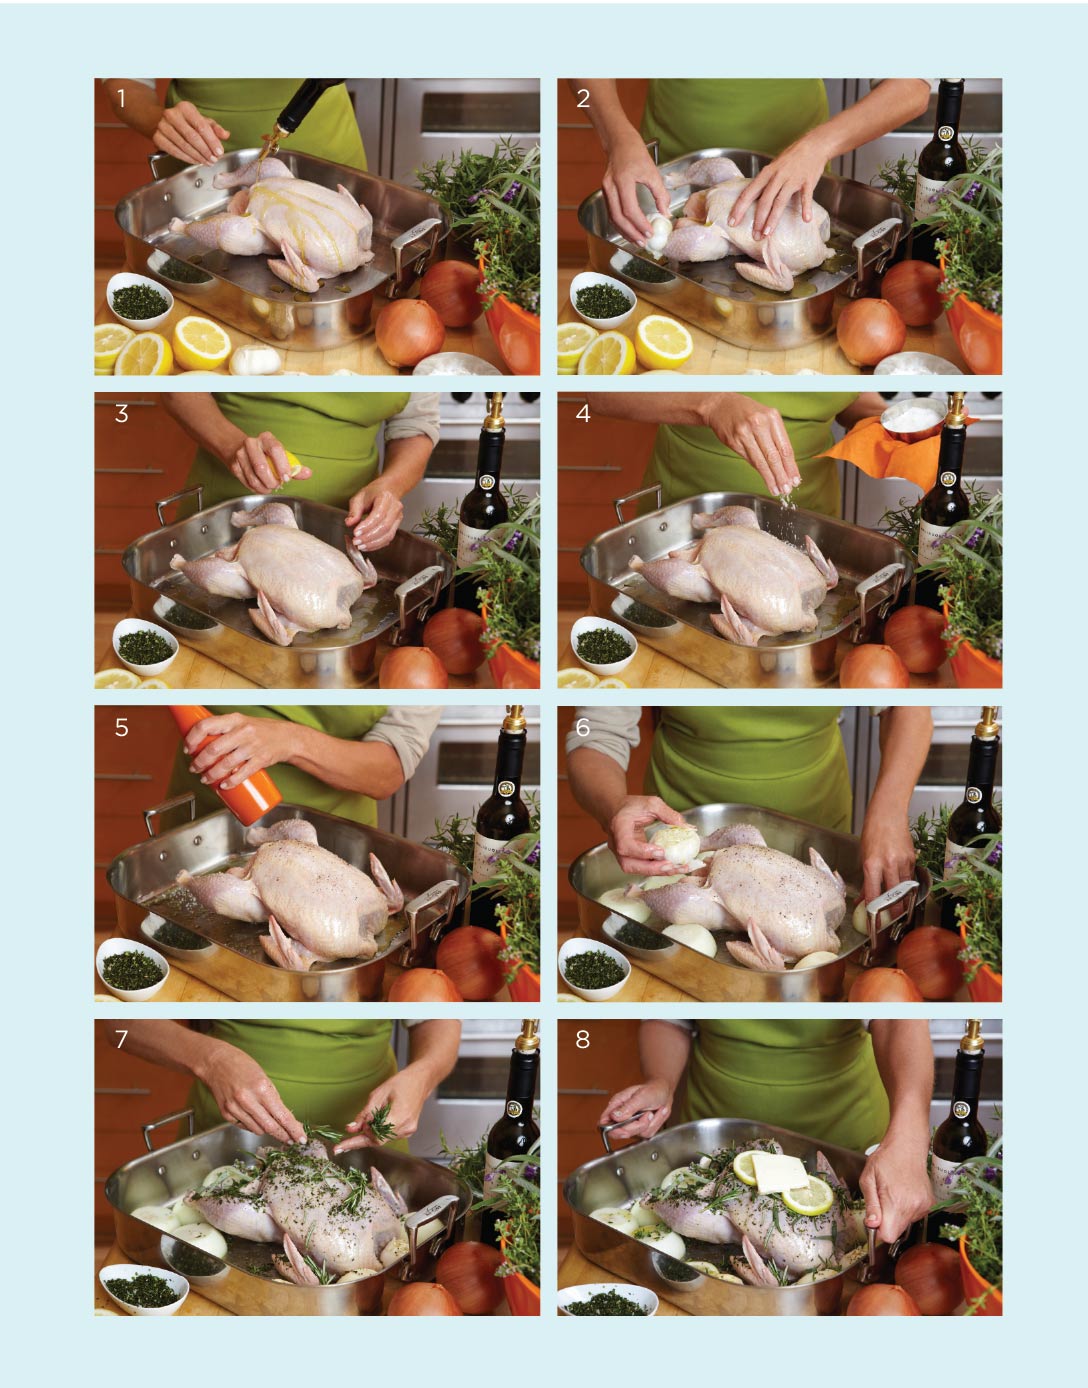 Images of Suzanne preparing the chicken